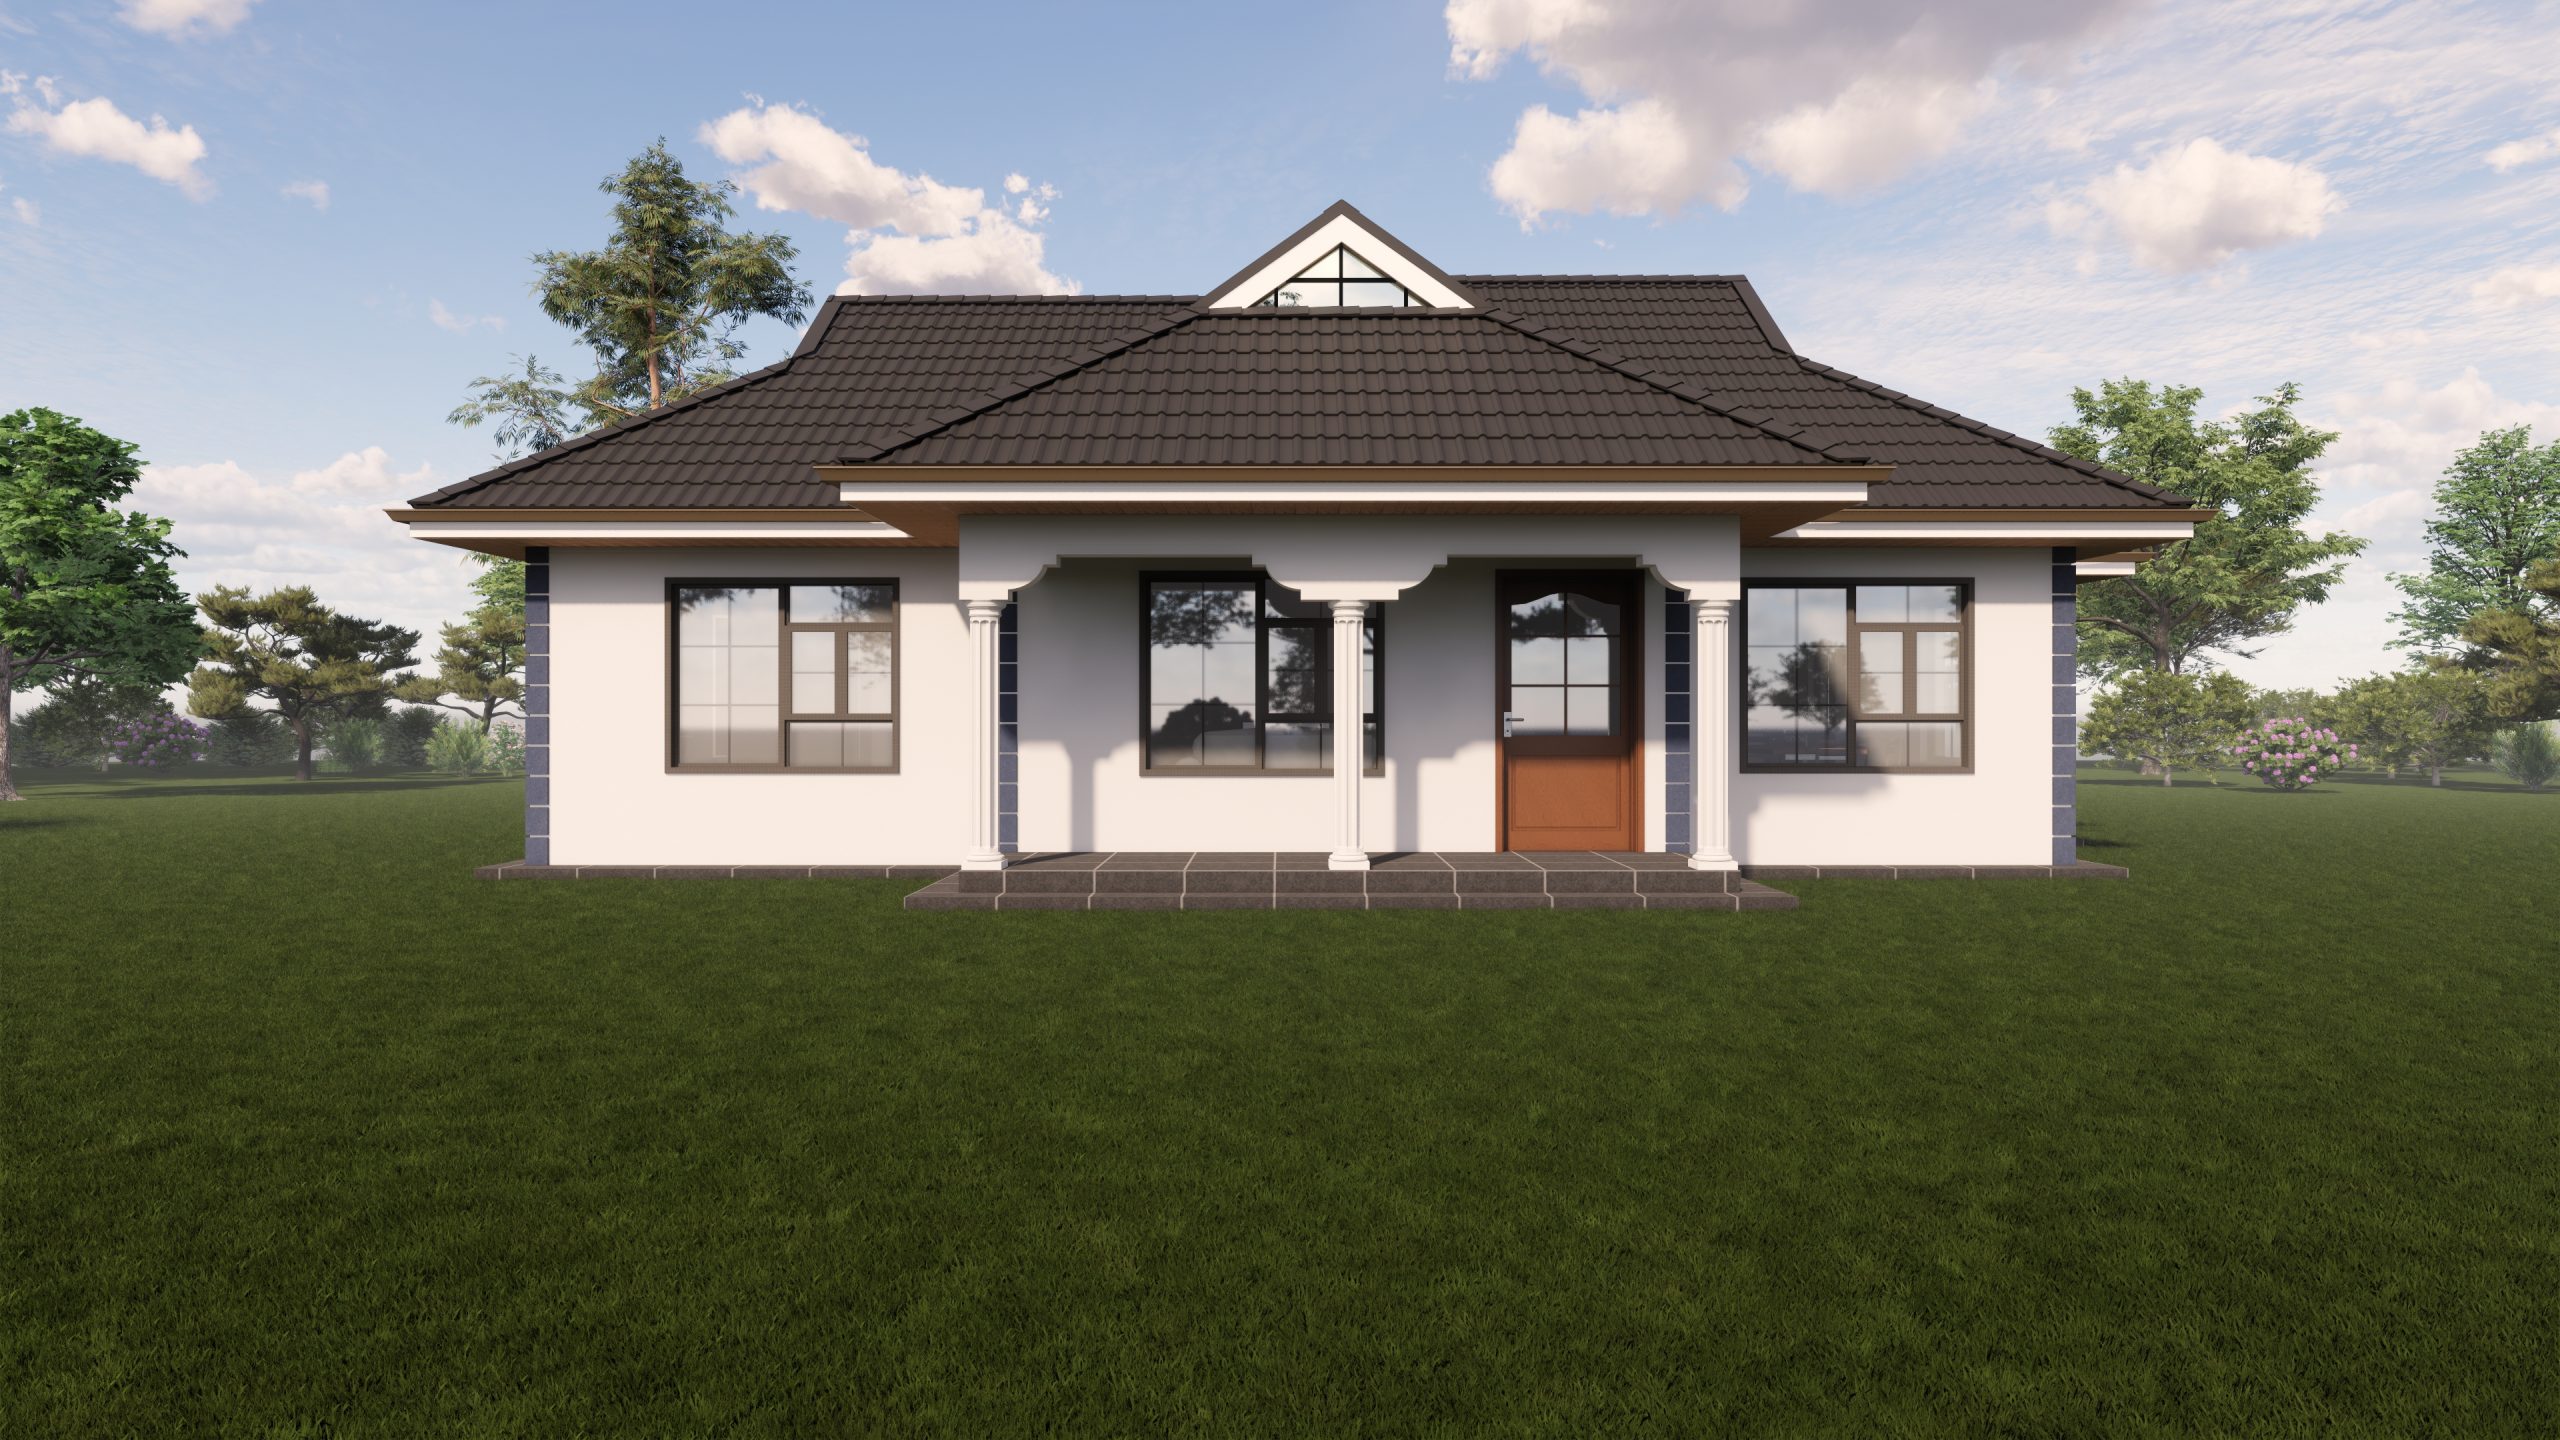 An Astounding Two Bedroom Bungalow House Plan